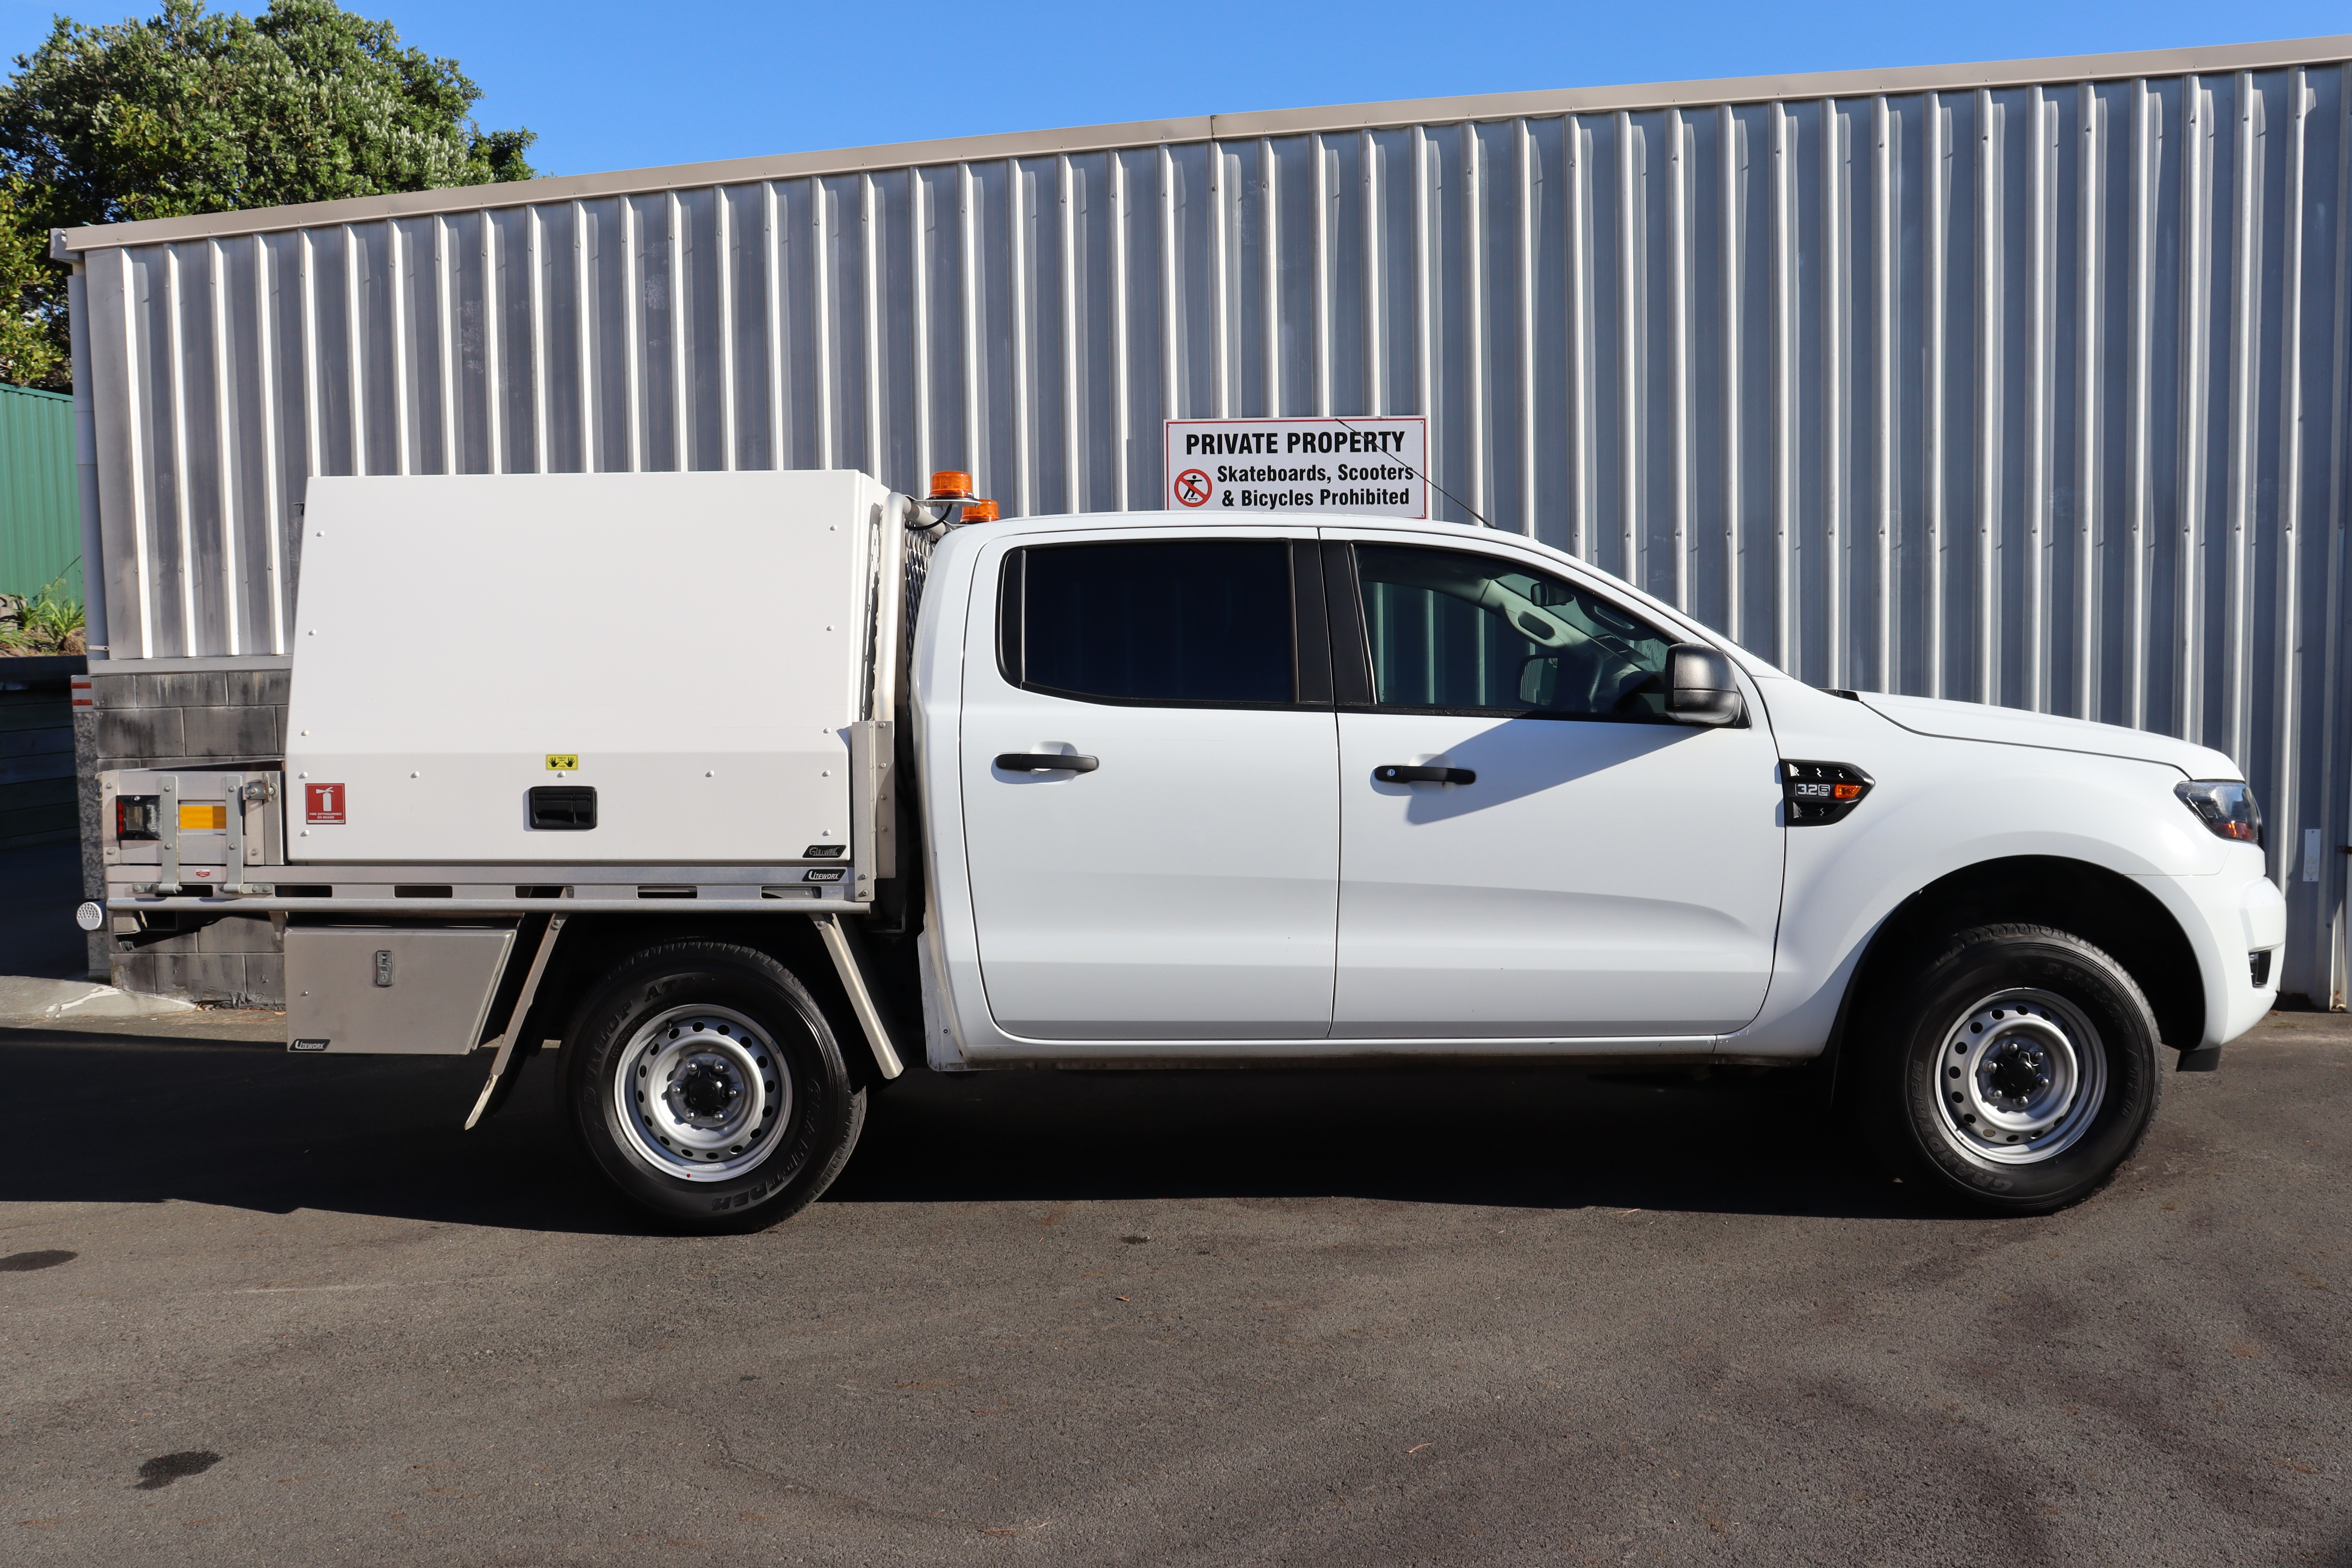 Ford Ranger  2017 for sale in Auckland